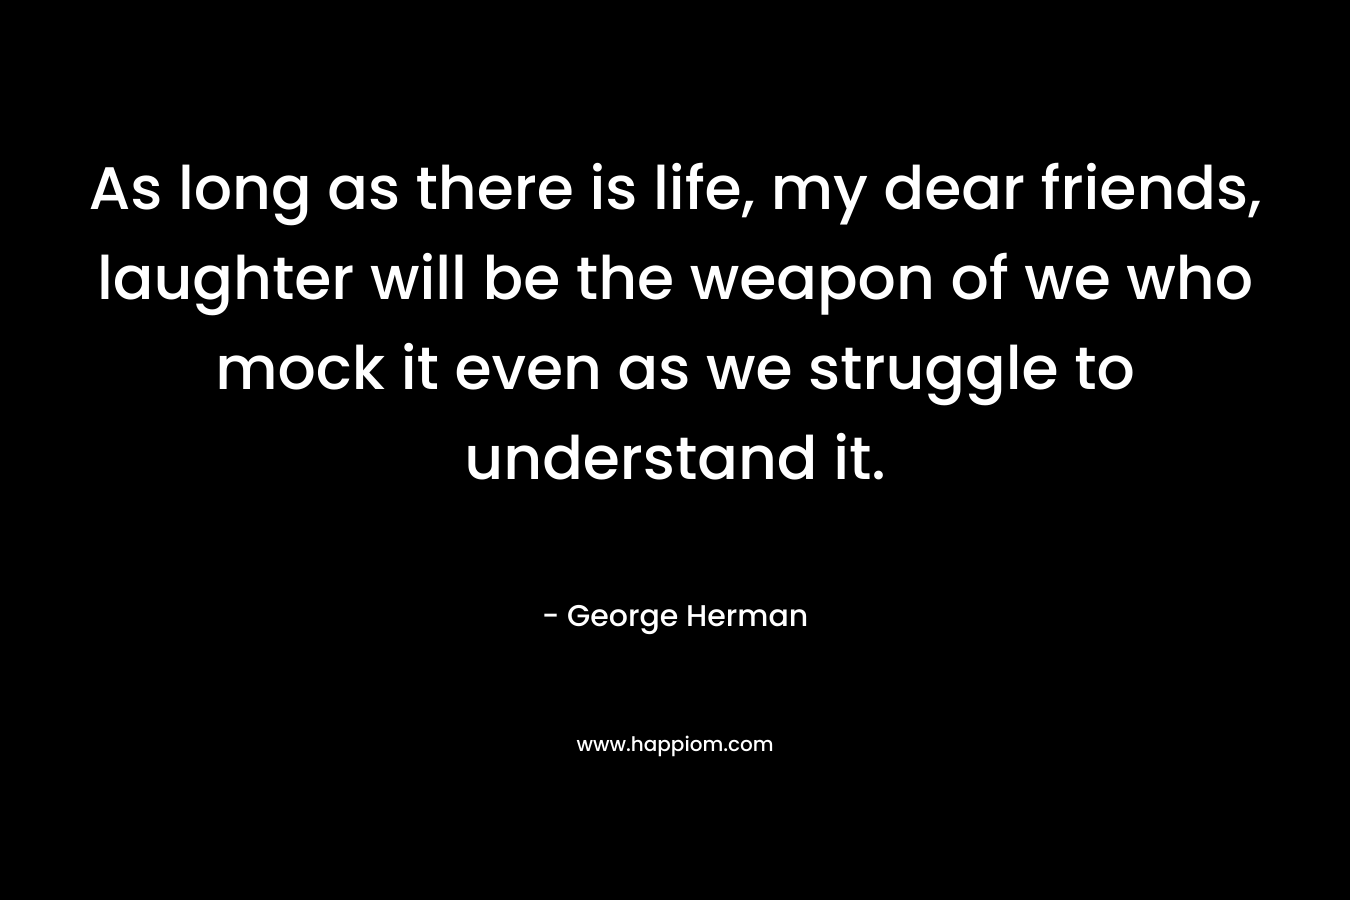 As long as there is life, my dear friends, laughter will be the weapon of we who mock it even as we struggle to understand it. – George Herman